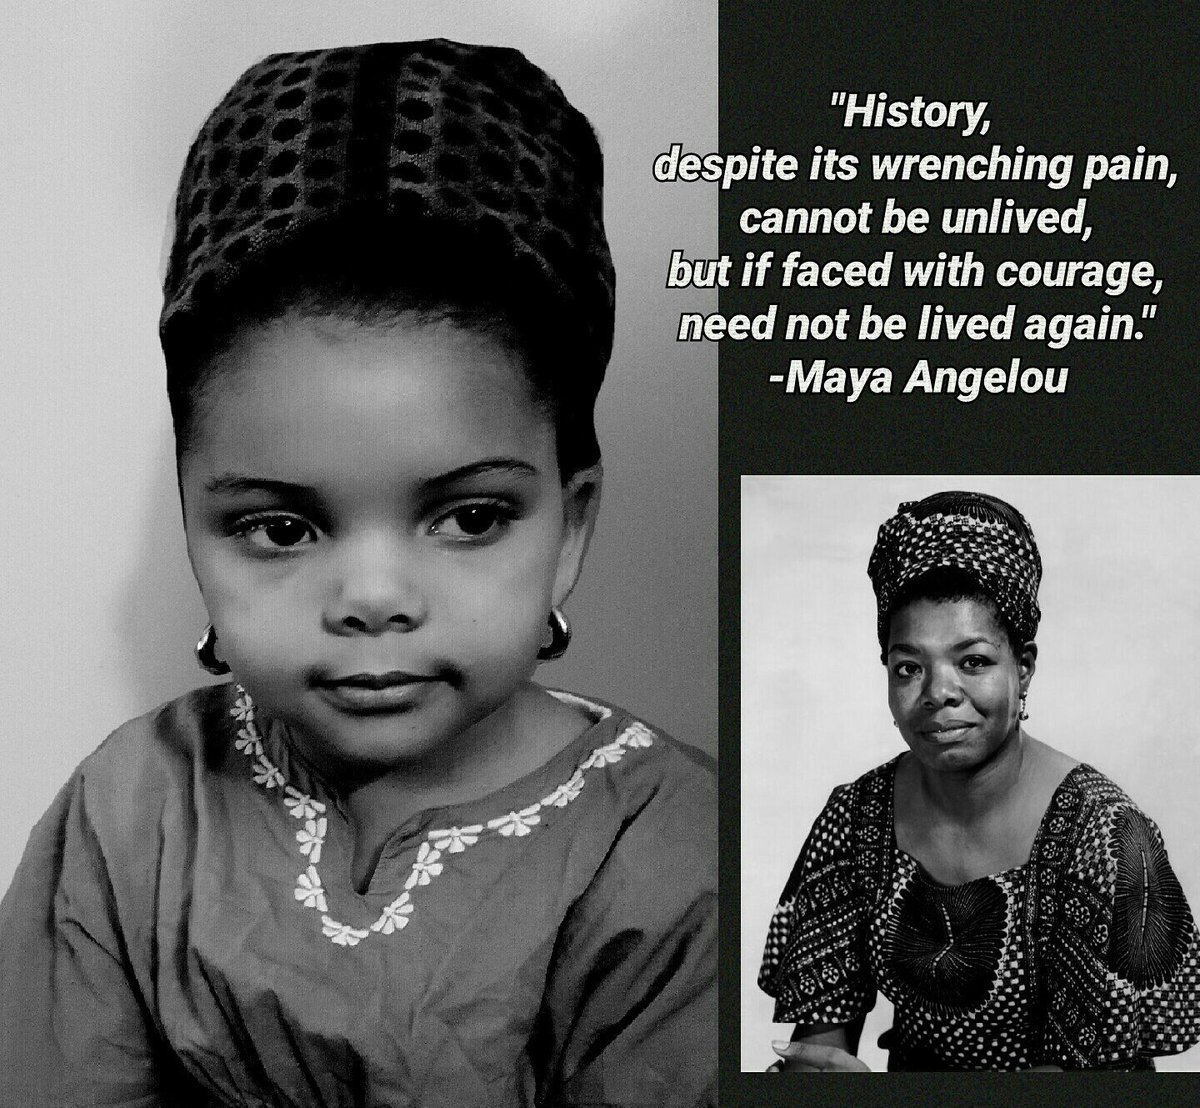 Smith-Jones picked out some influential black women from history and taught Lola about them. They then showed Lola pictures of the women, and she picked out who she wanted to dress up as.
The family rummaged through their cupboards to recreate an iconic woman for each day of Black History Month.